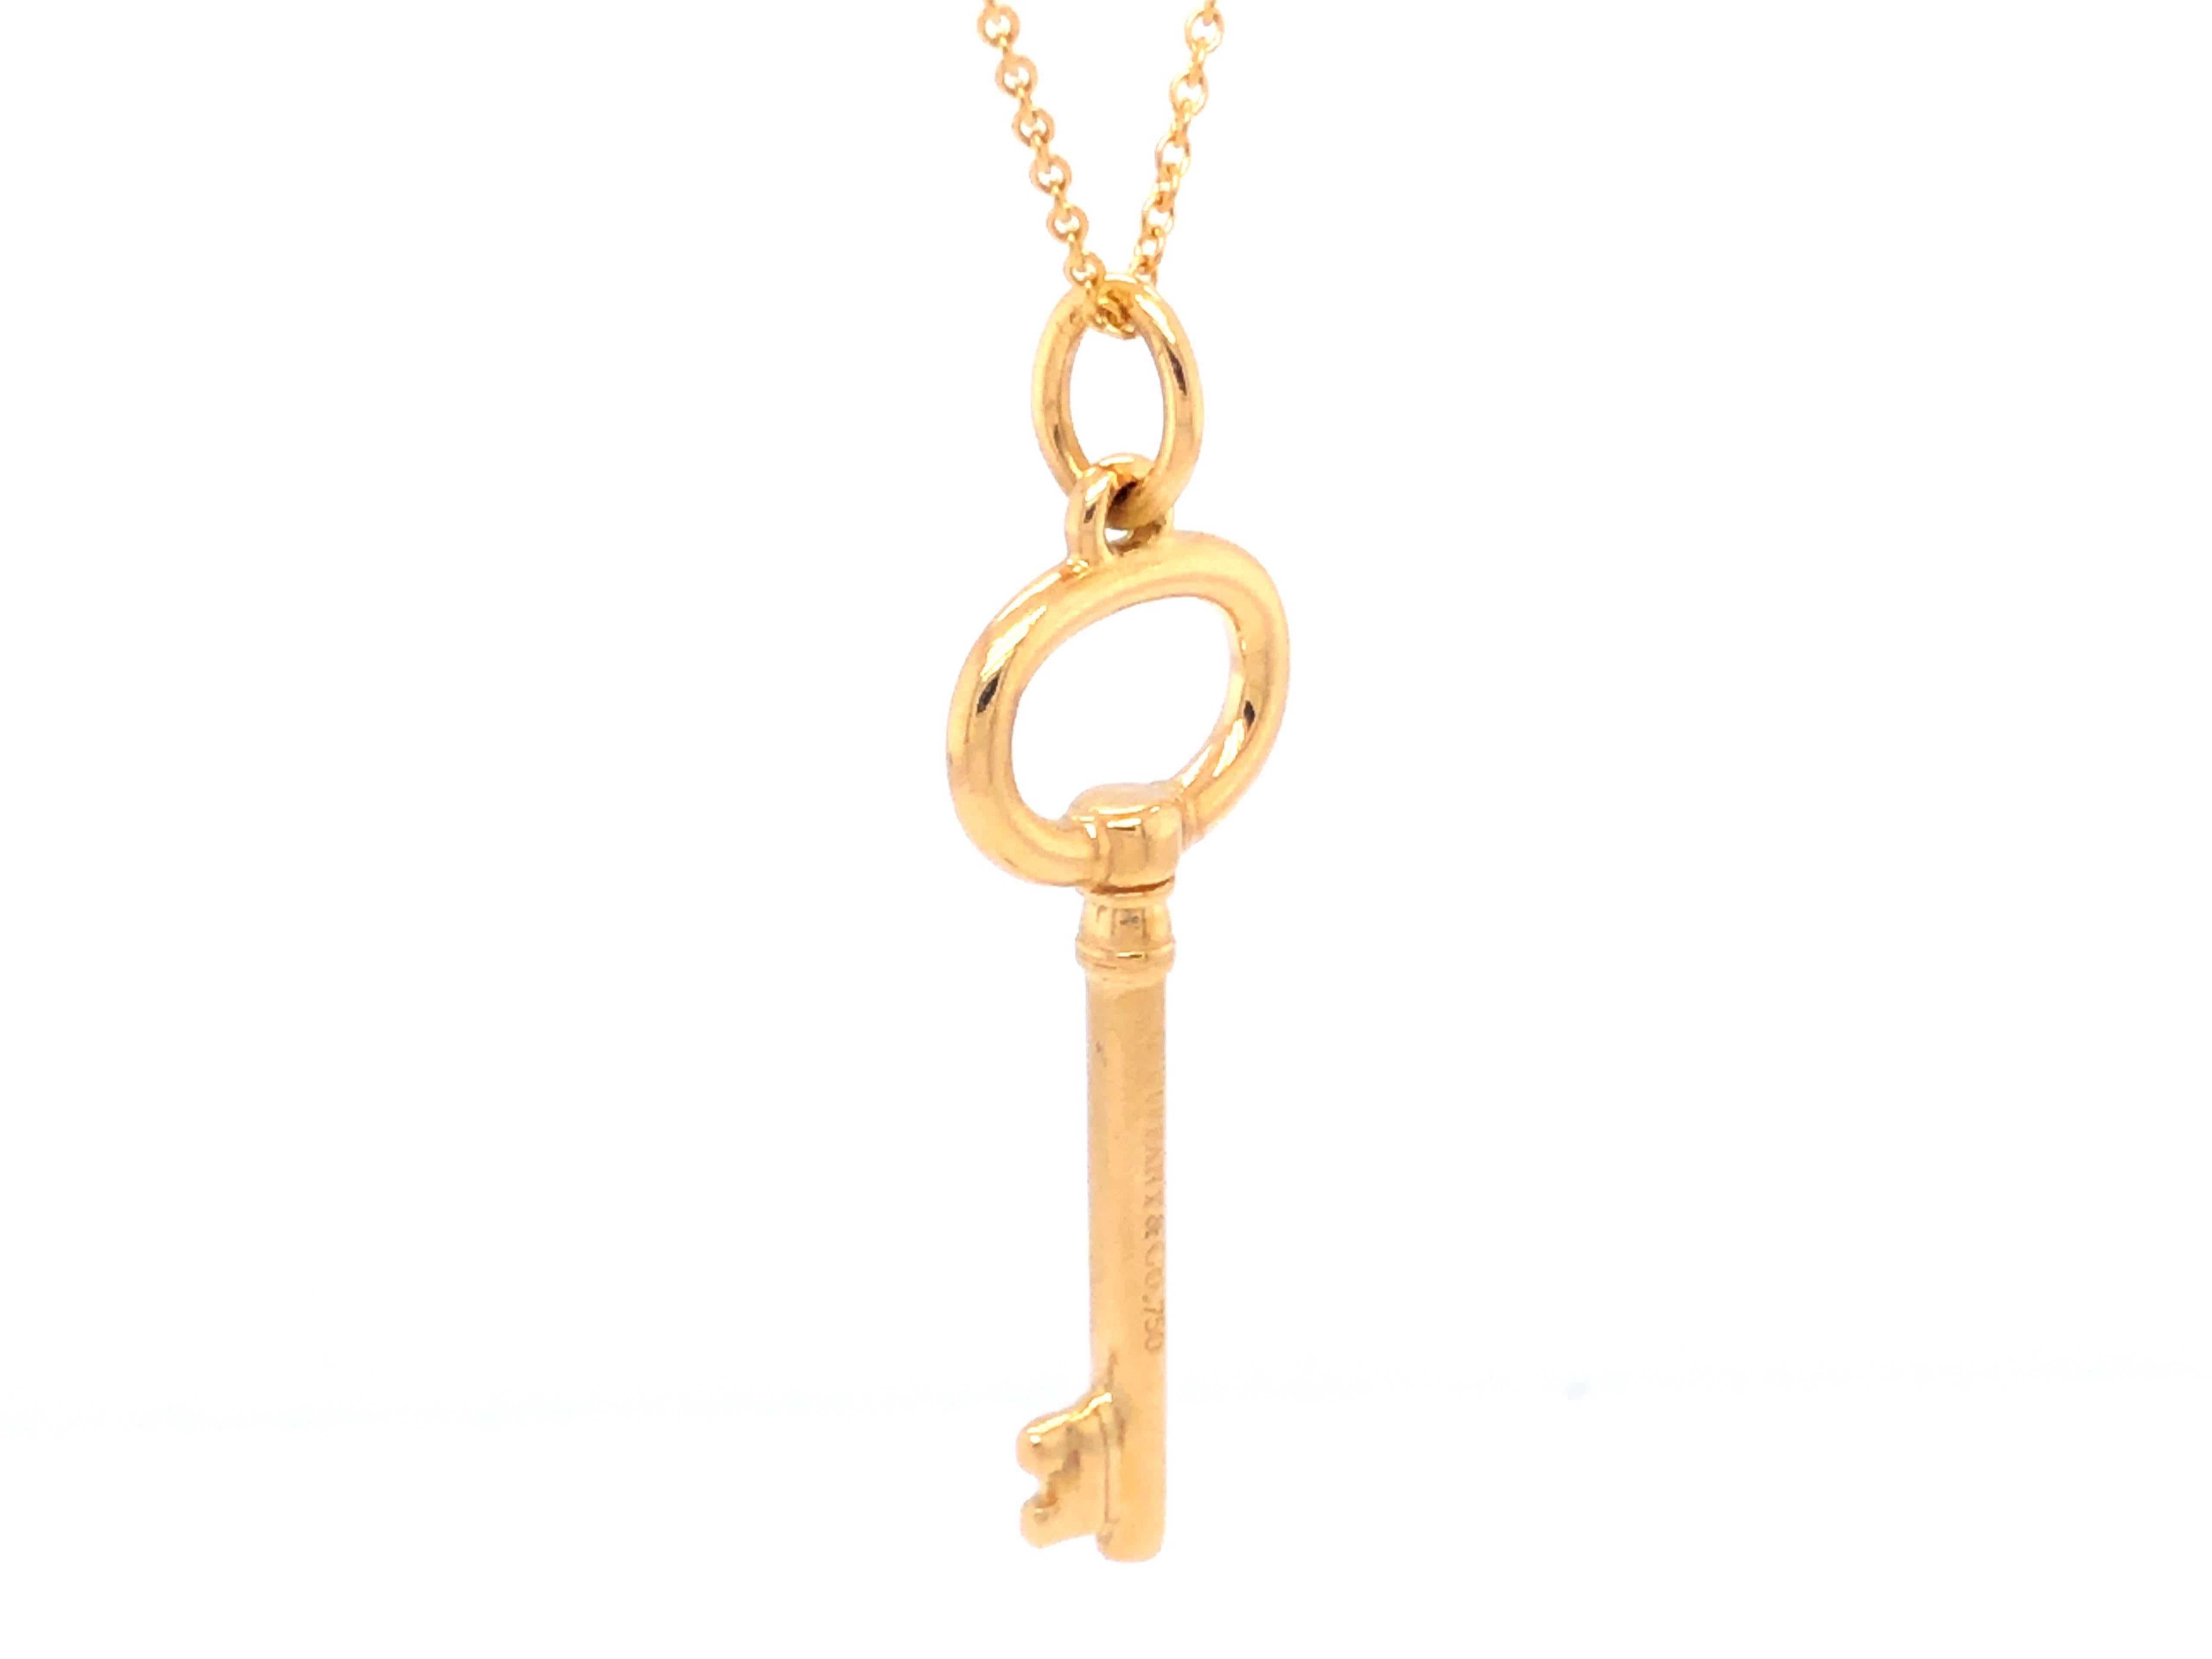 Modern Tiffany & Co. Oval Key Pendant and Chain, 18k Yellow Gold